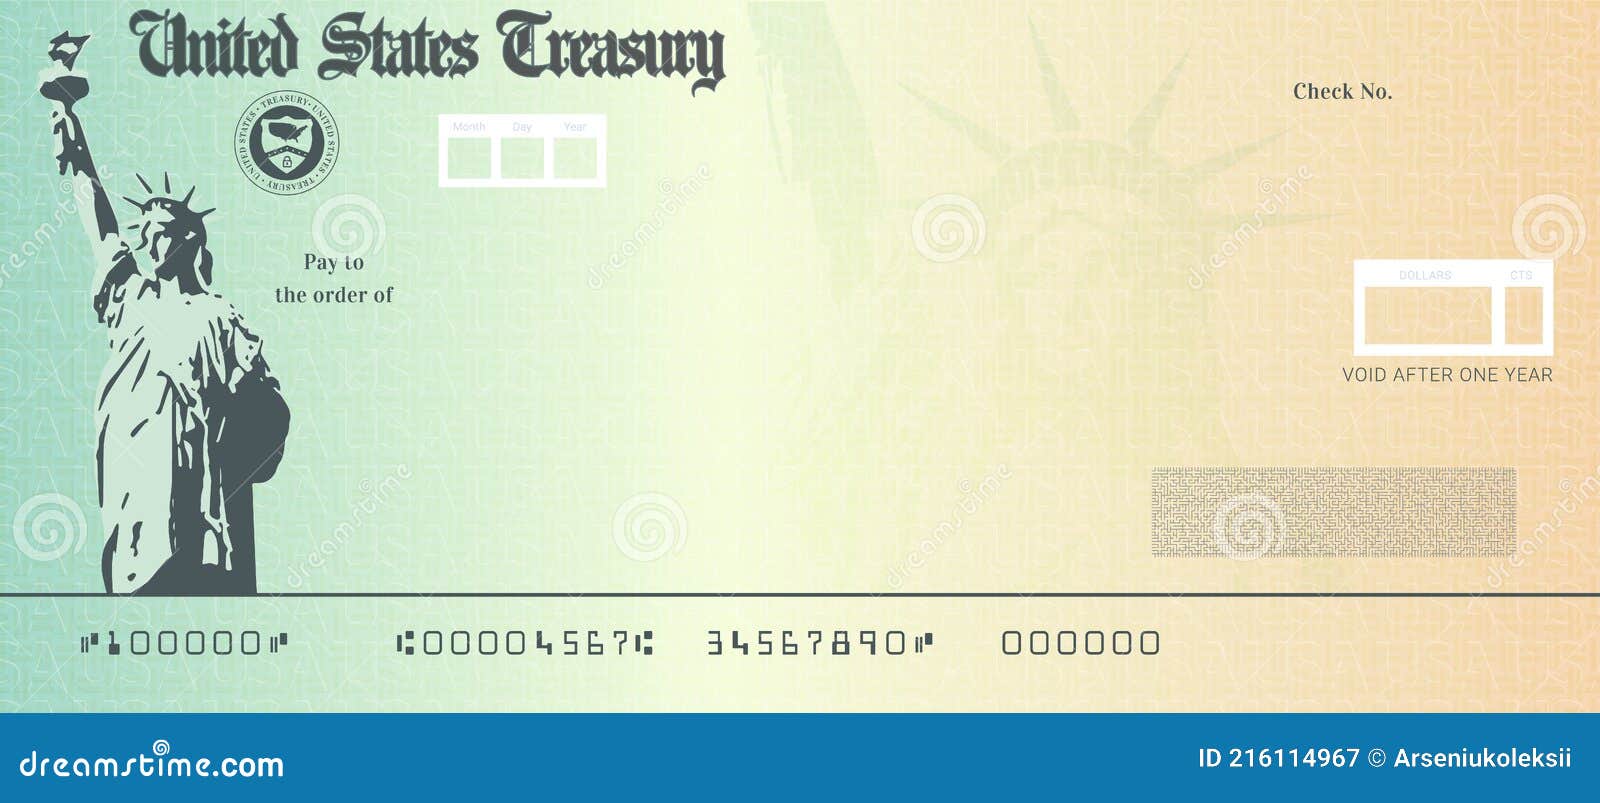 Blank Stimulus Check Template. Stock Vector Illustration of grant